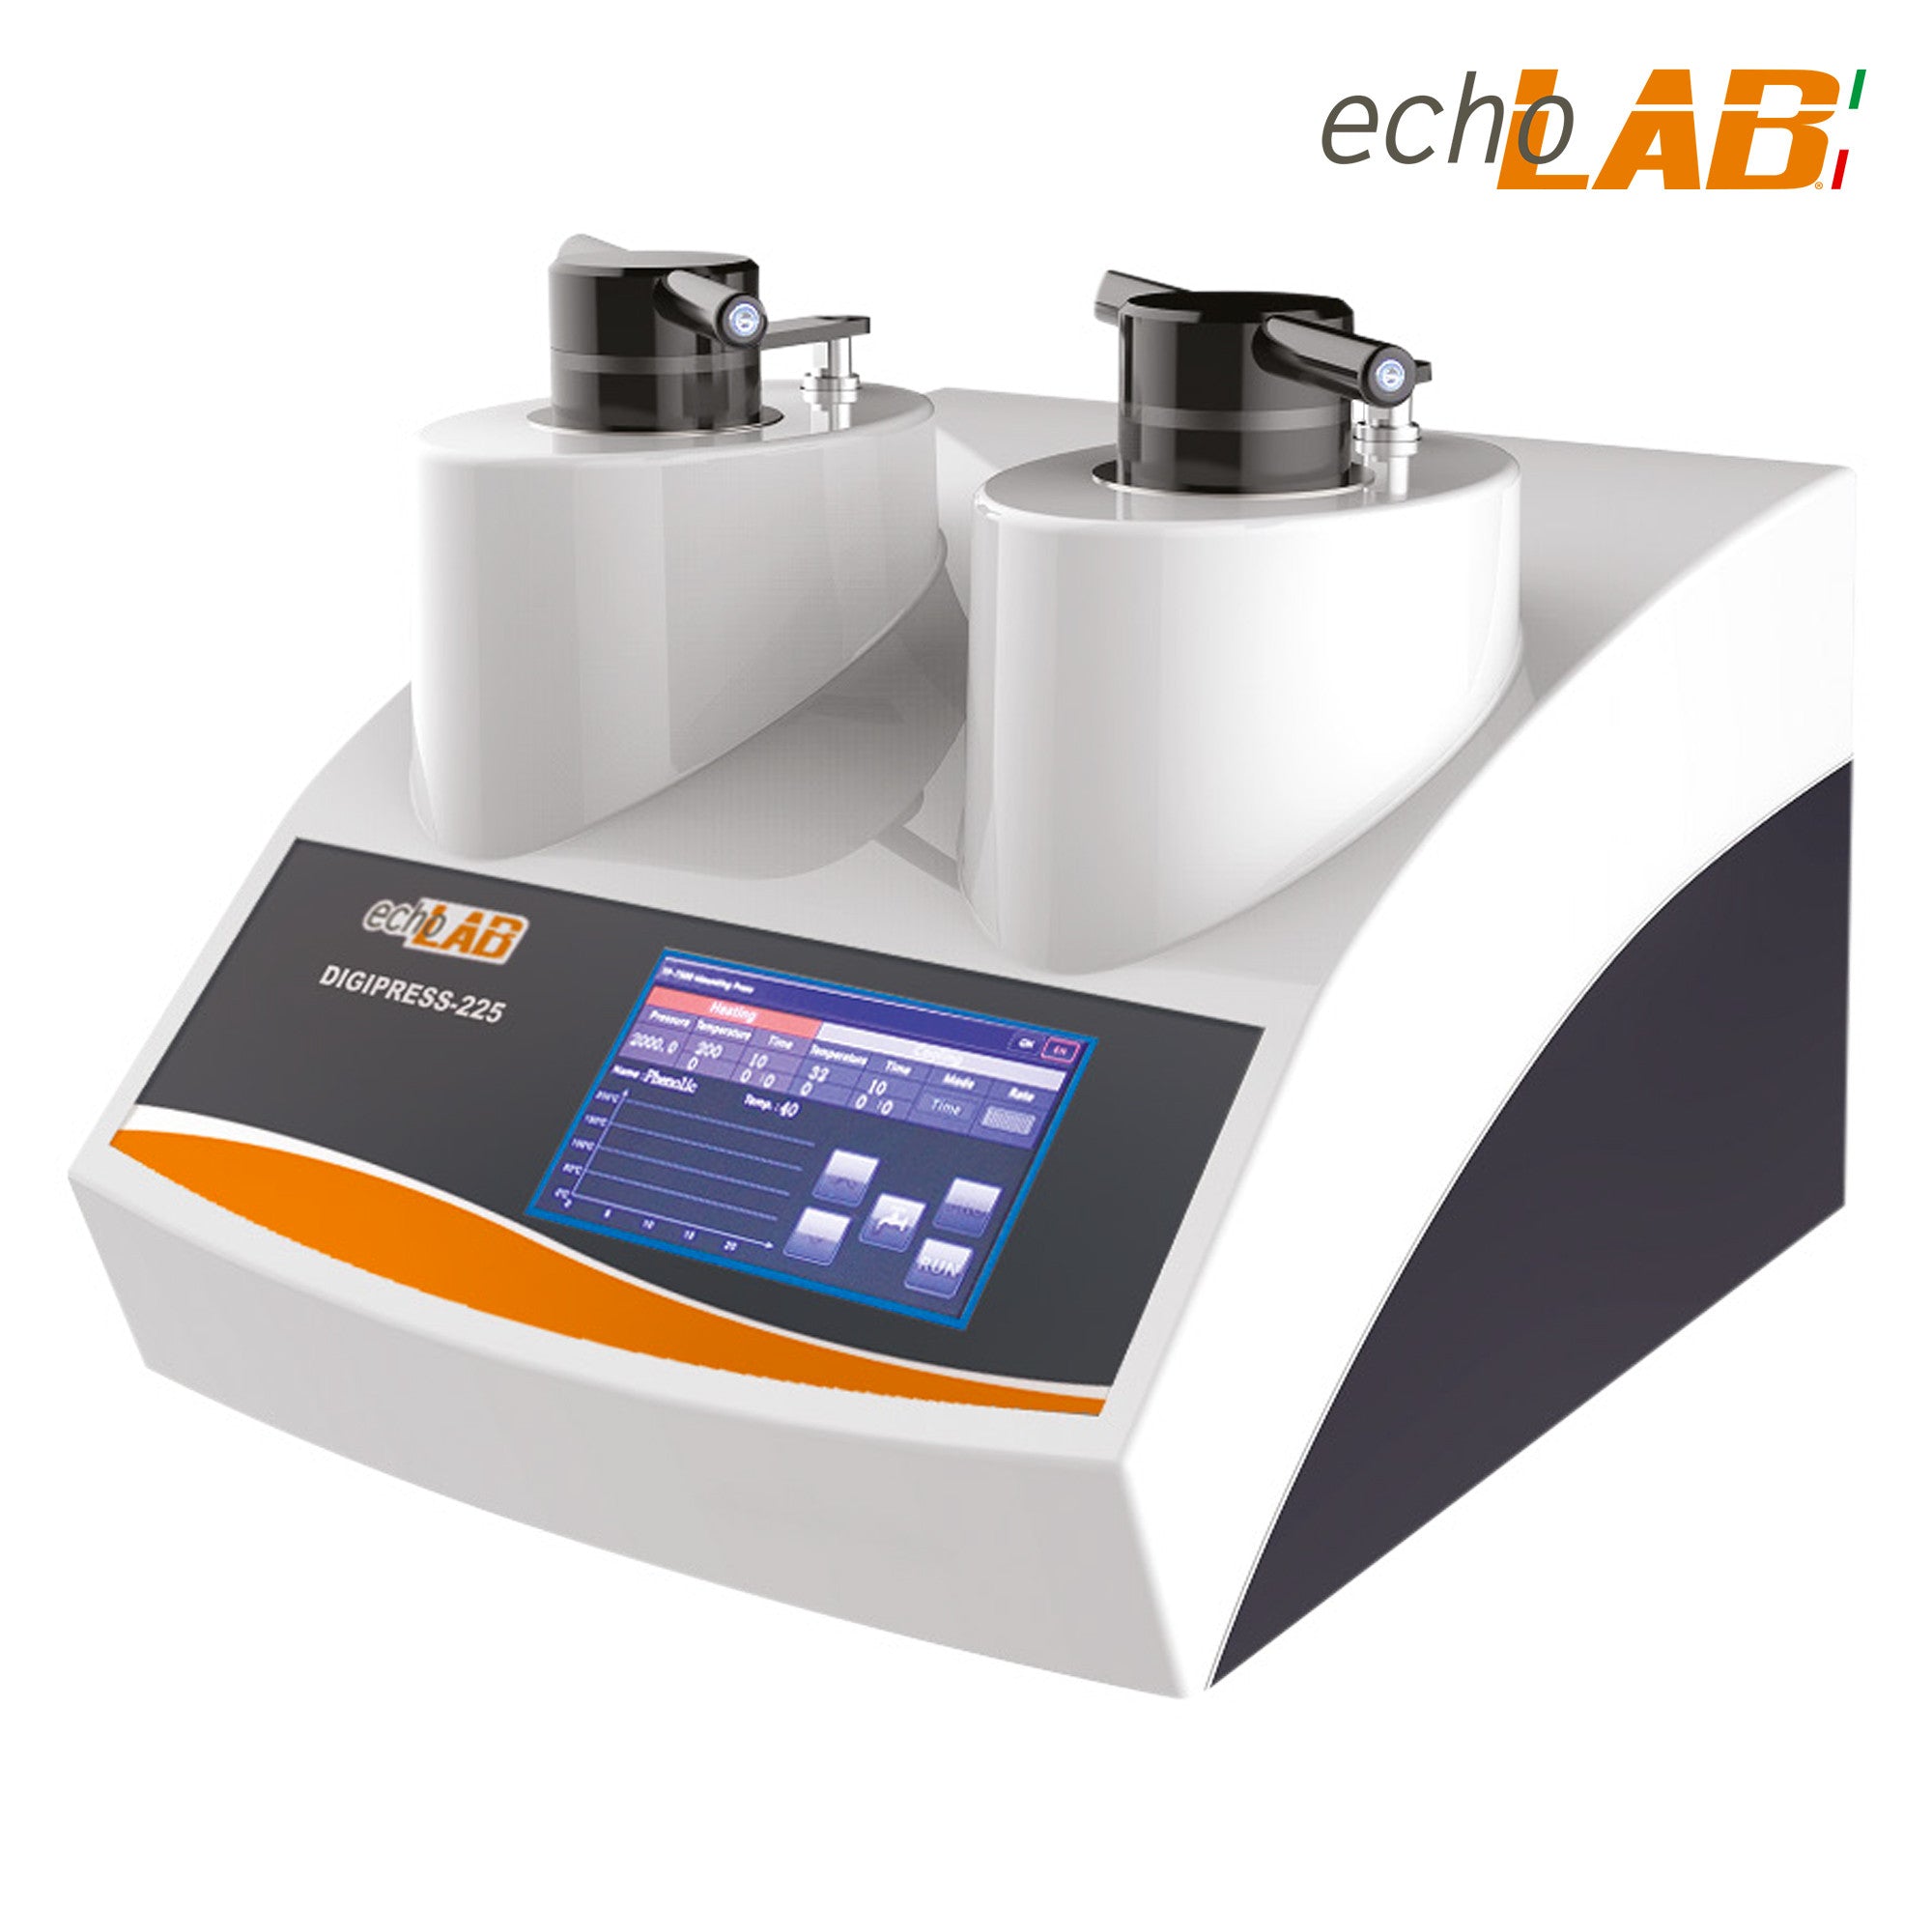 Fully automatic, digital bench-top mounting press different mold sizes from  25 to 50mm 2 mounting operations - echoLAB